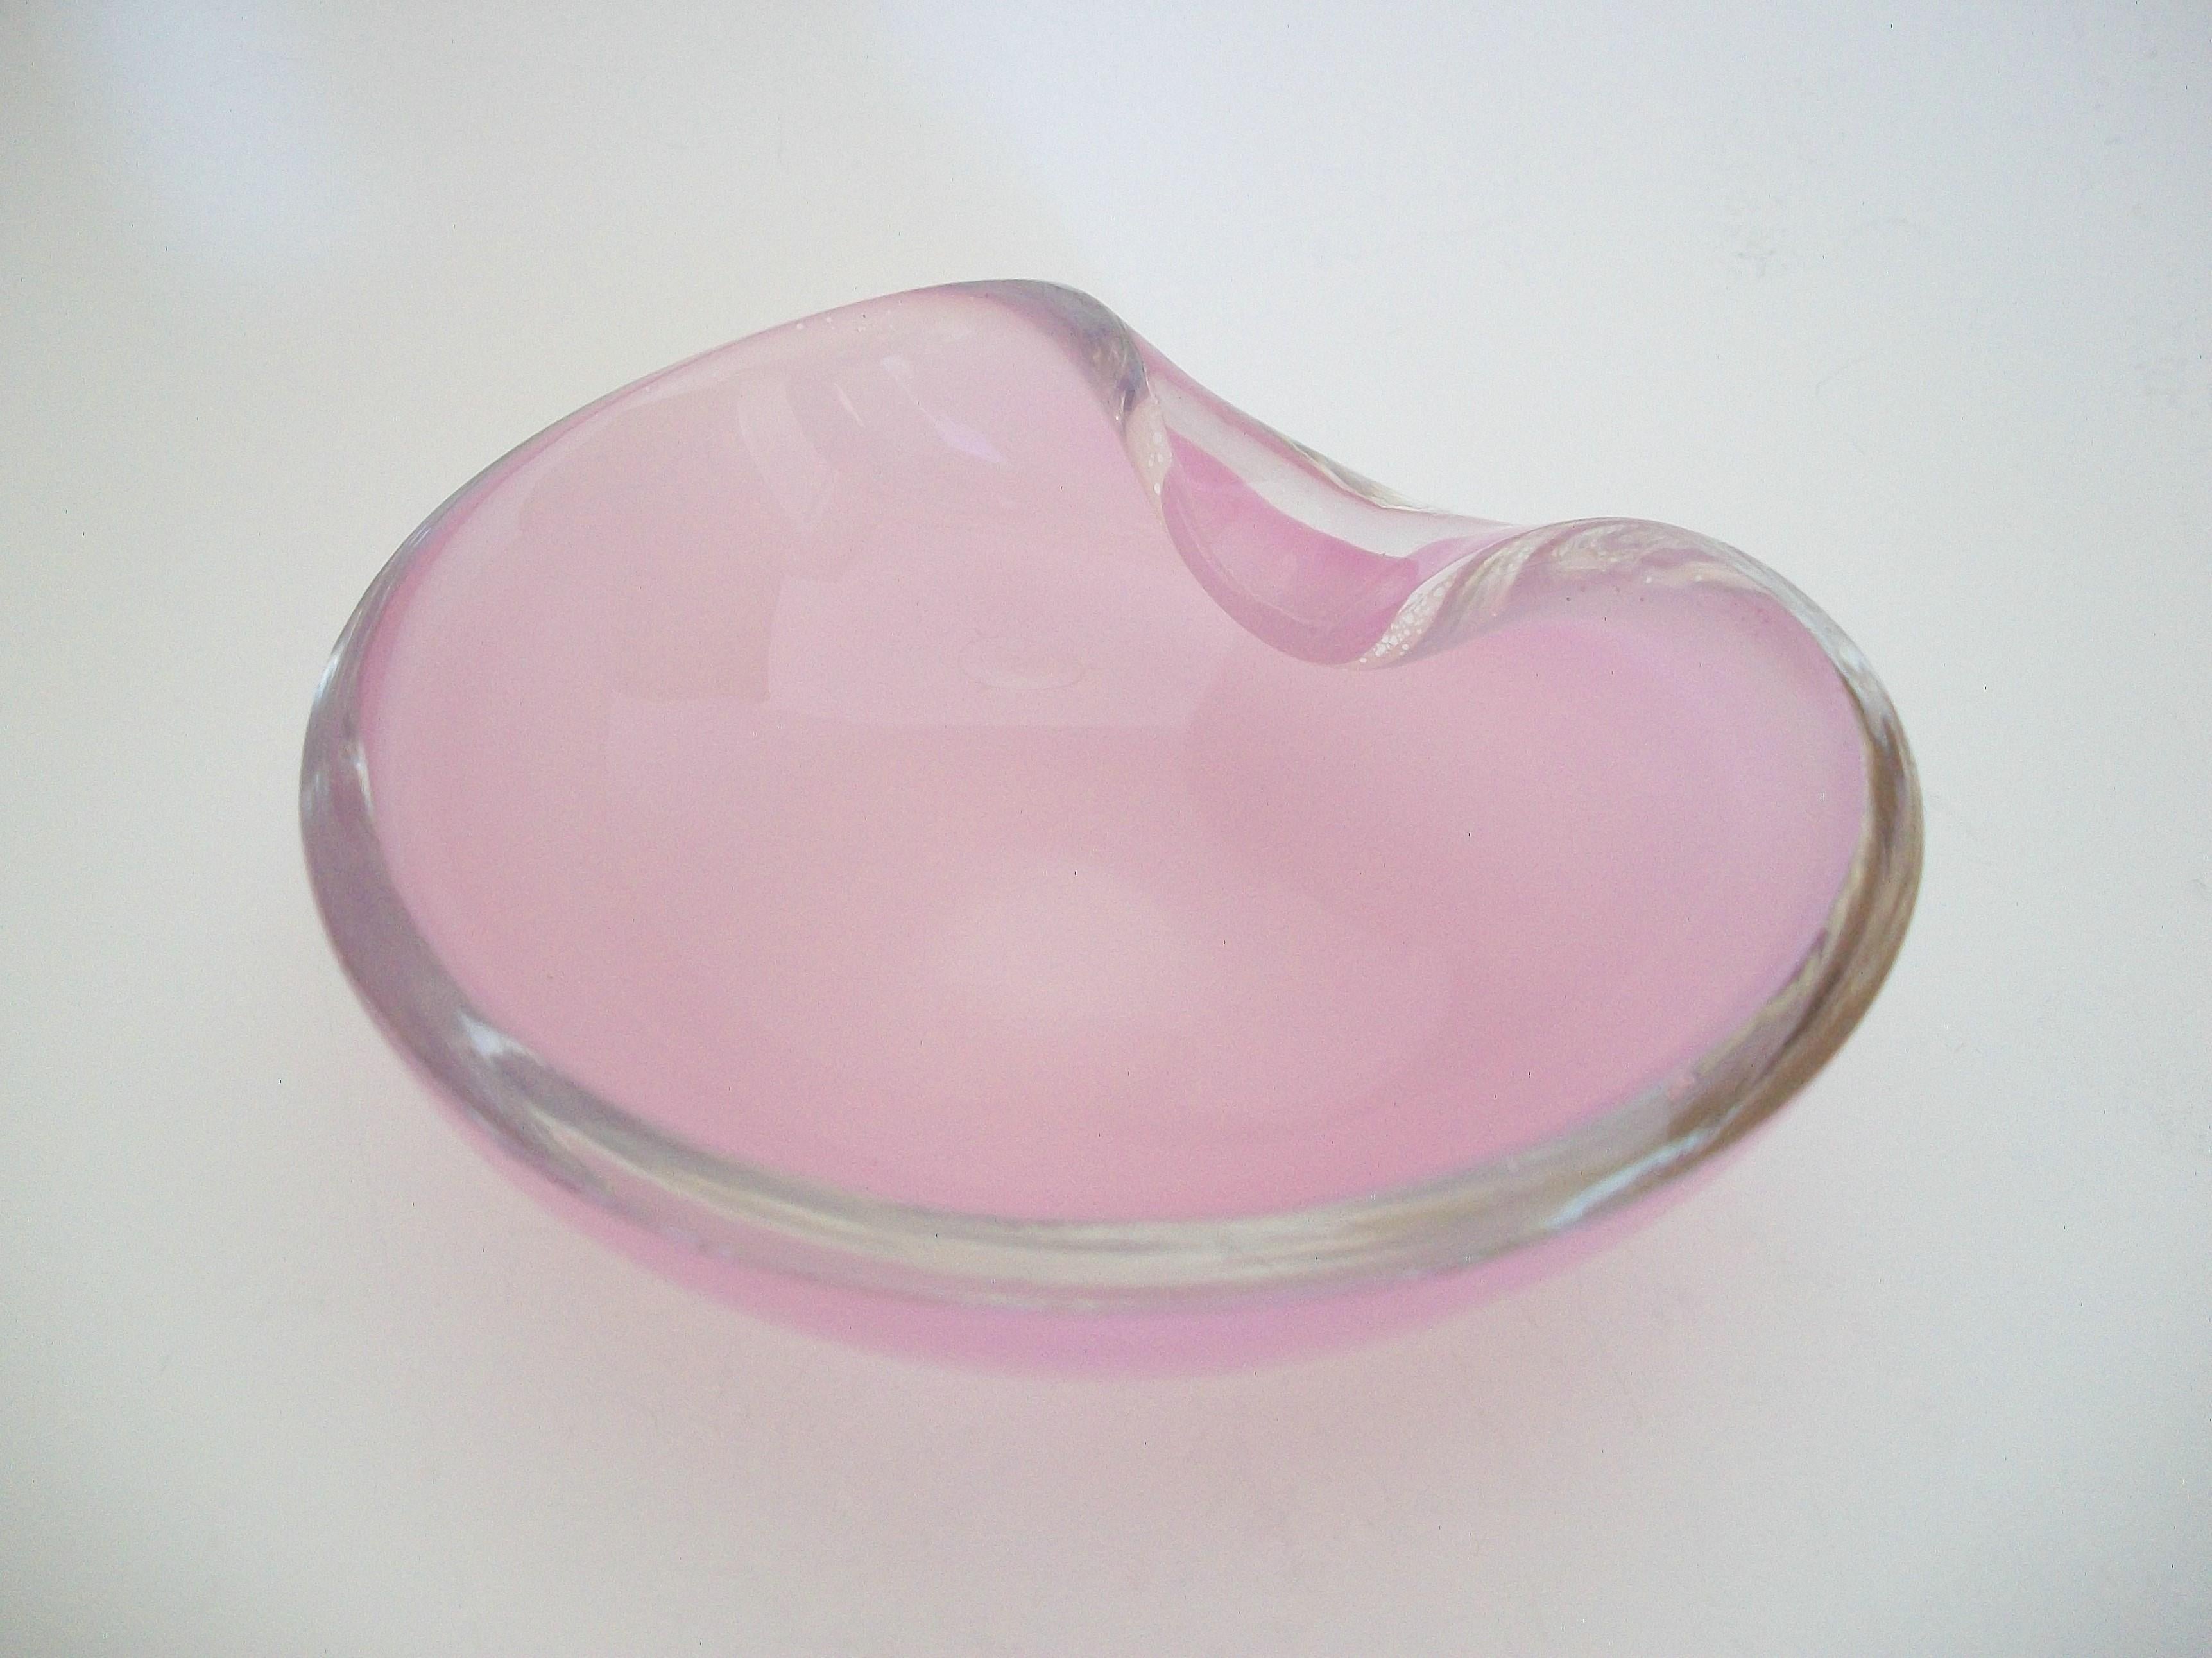 TAPIO WIRKKALA - IITTALA - Design No. 3317 - Mid Century Scandinavian sculptural pink glass / crystal bowl with indented rim - signed on the side (as photographed) - Finland - circa 1948-59.

Excellent vintage condition - one minor flea bite to